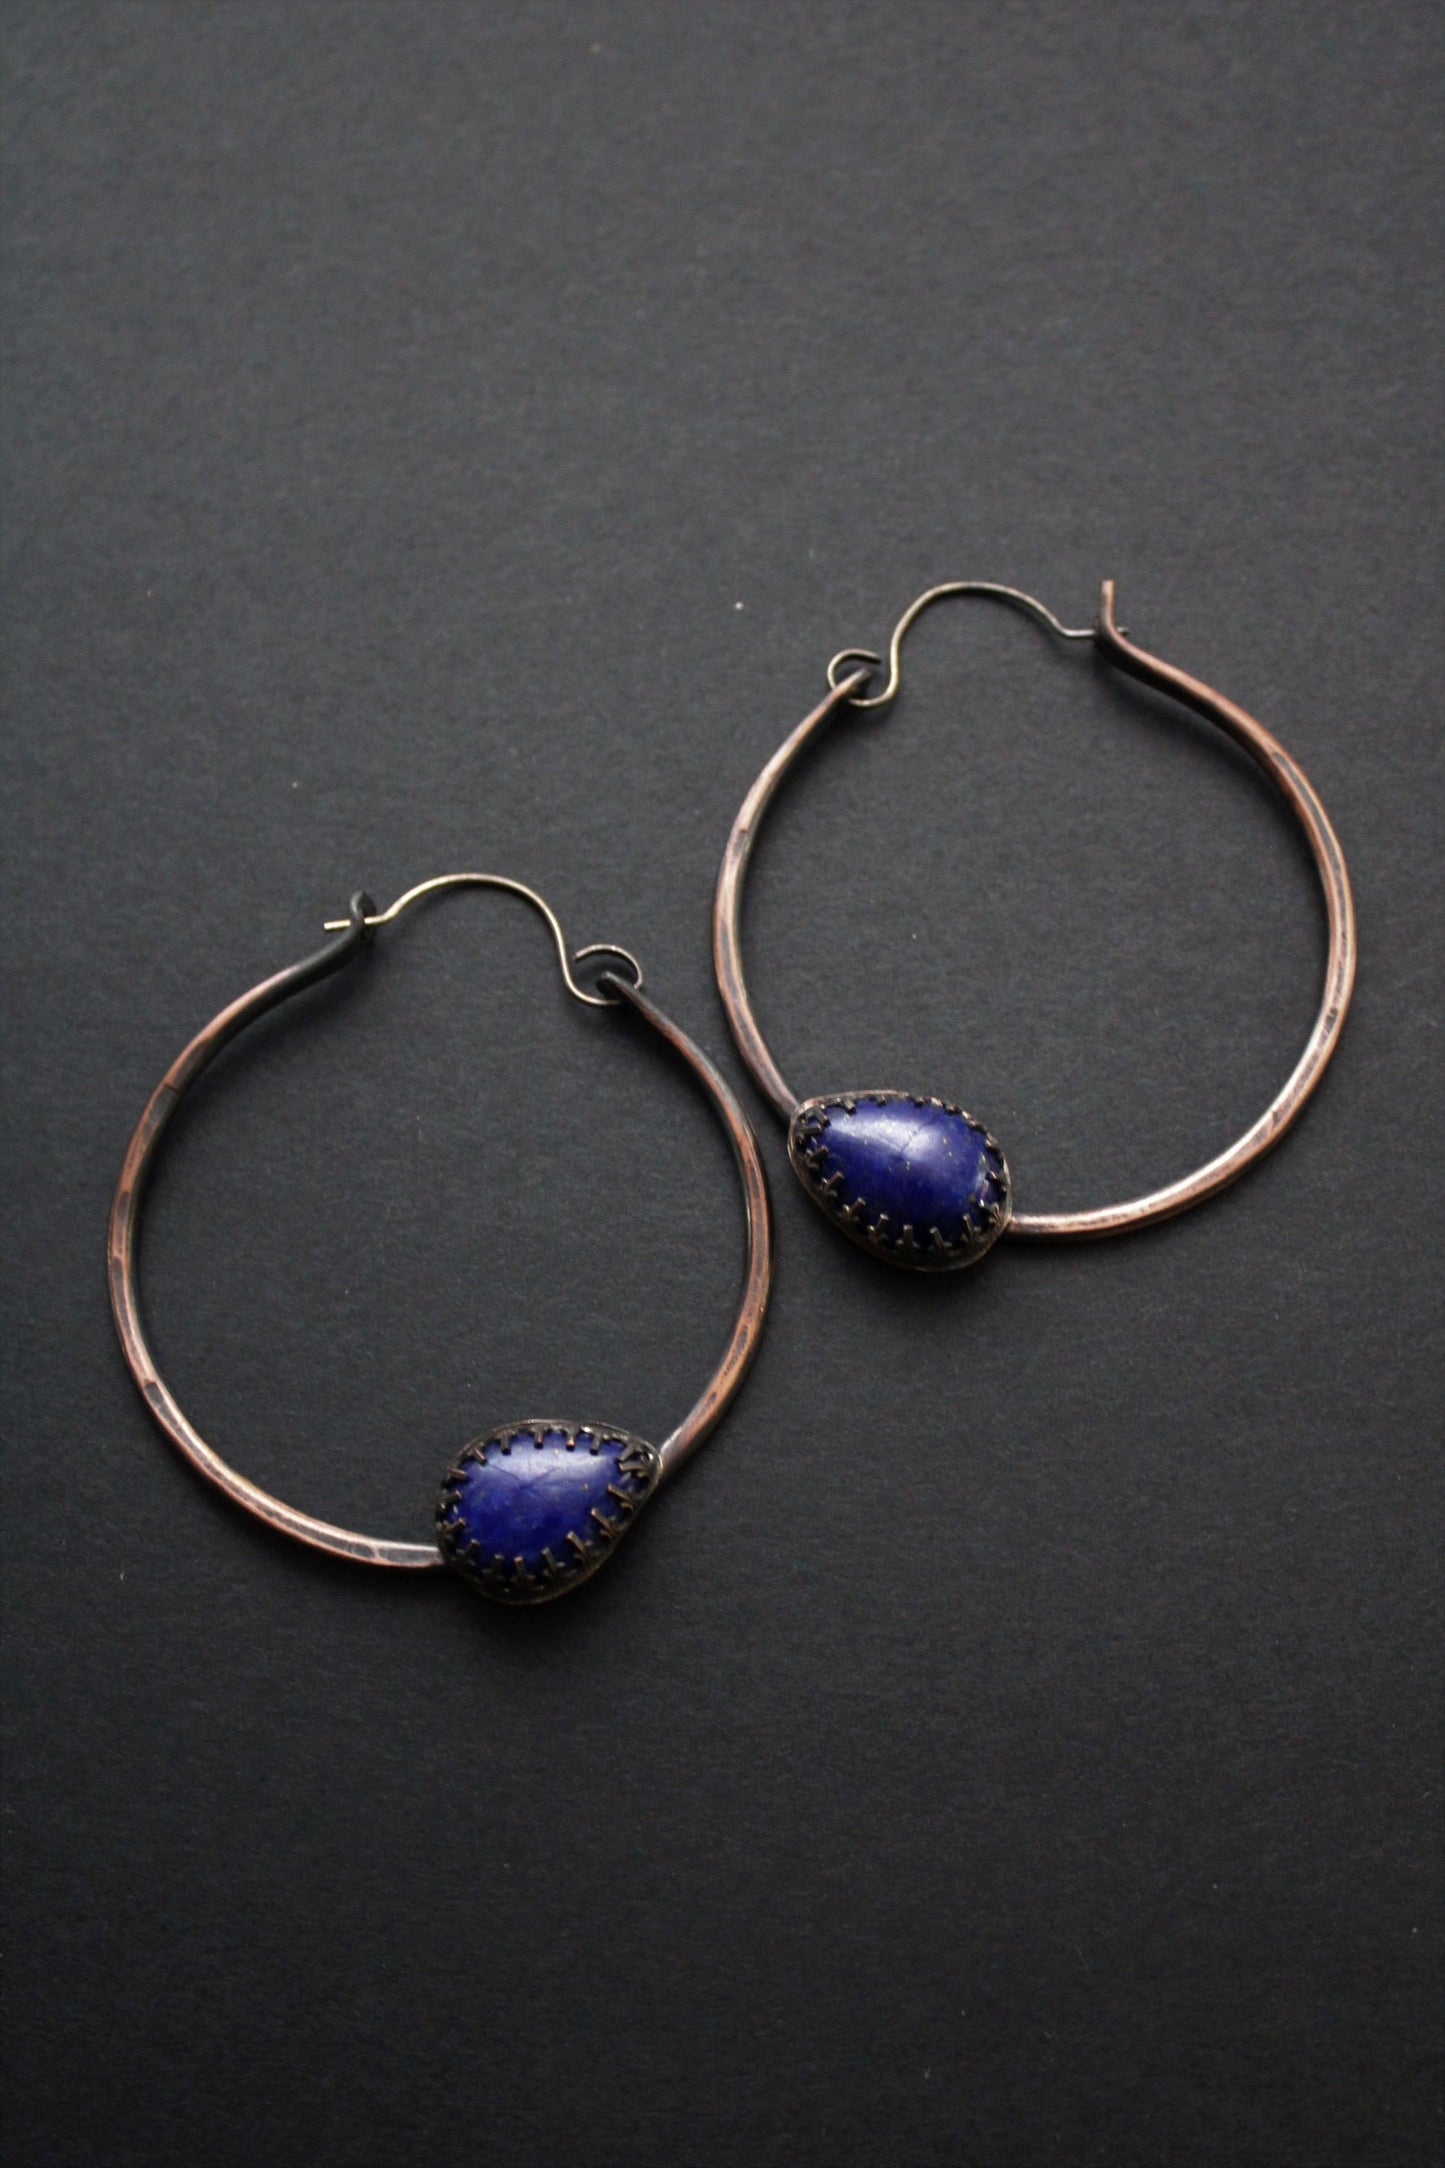 Lapis Lazuli Gemstone (pear shaped) and Hammered Copper Hoop Earrings